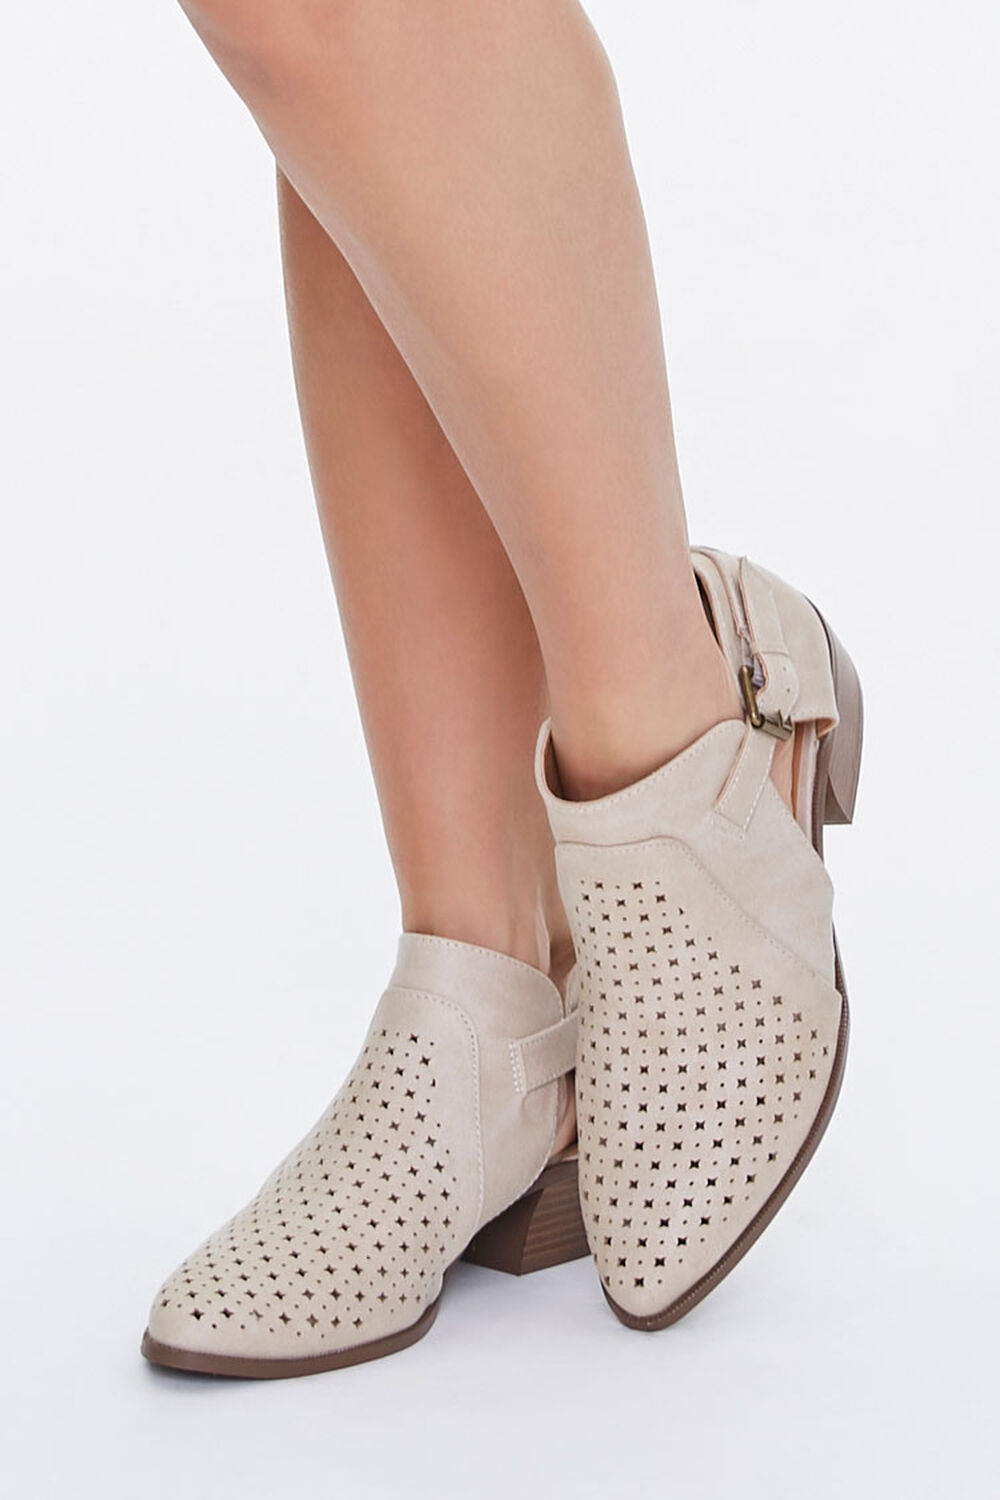 Perforated Buckled Booties, image 1